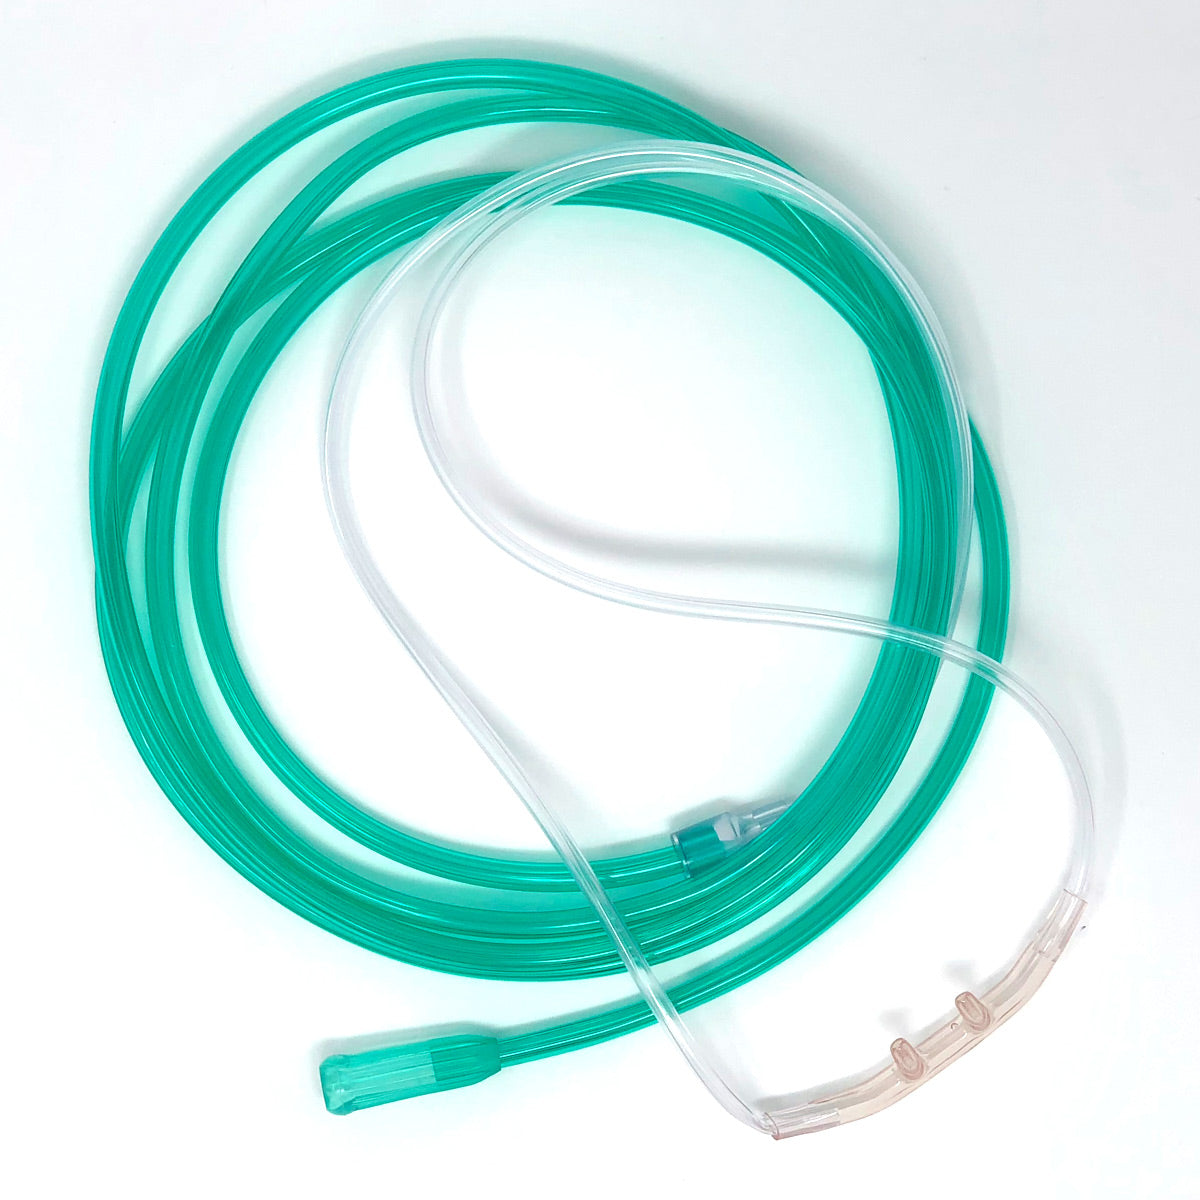 Salter 16SOFT High Flow Nasal Cannula with 7 Foot Green Oxygen Supply Tube